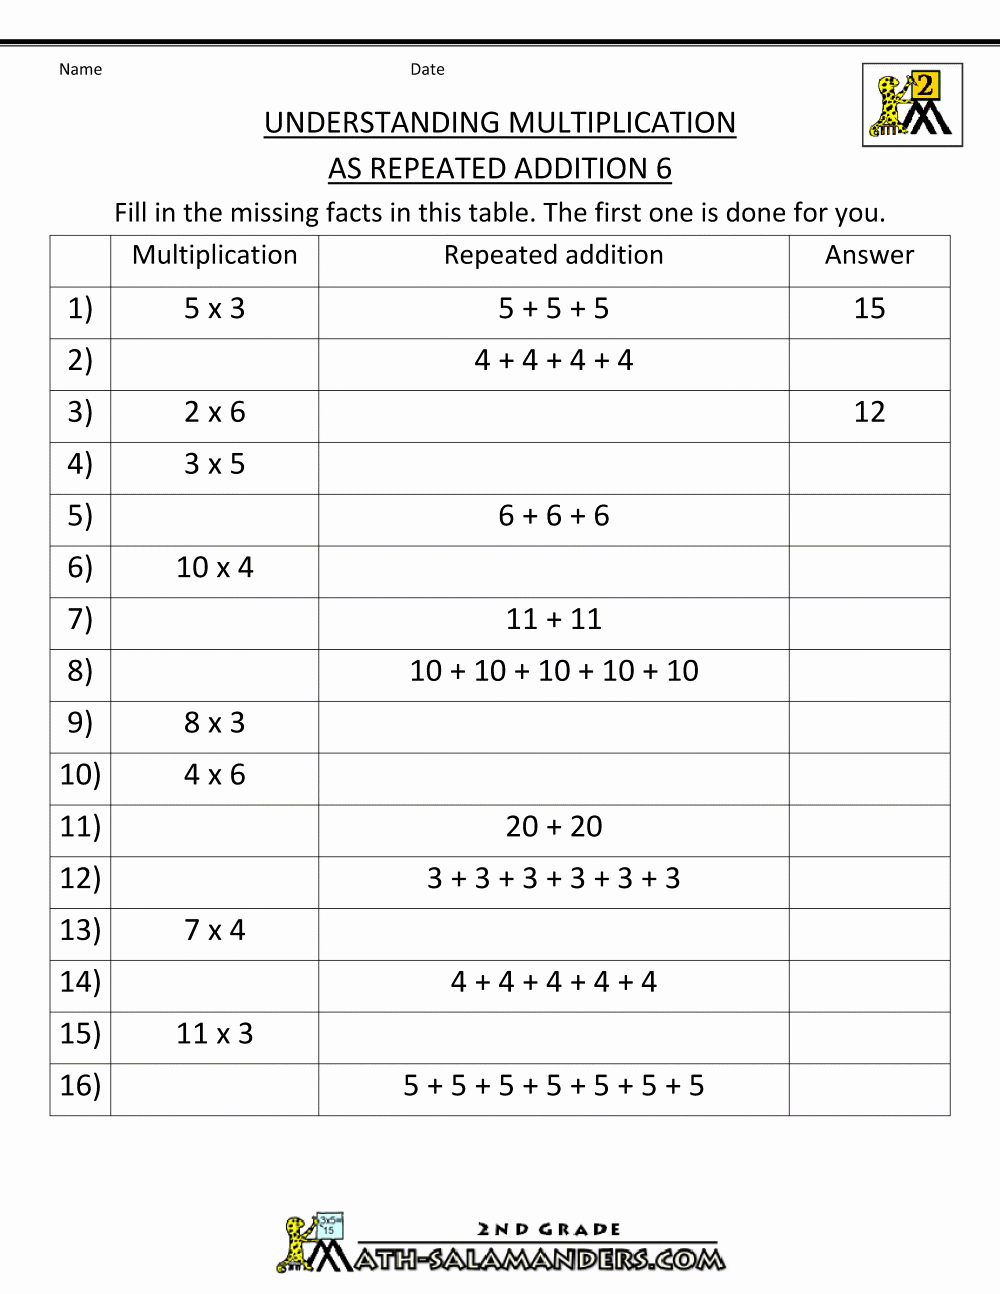 Repeated Addition Worksheets 2nd Grade Fresh Additions Repeated Addition Worksheets 3rd Grade Math for